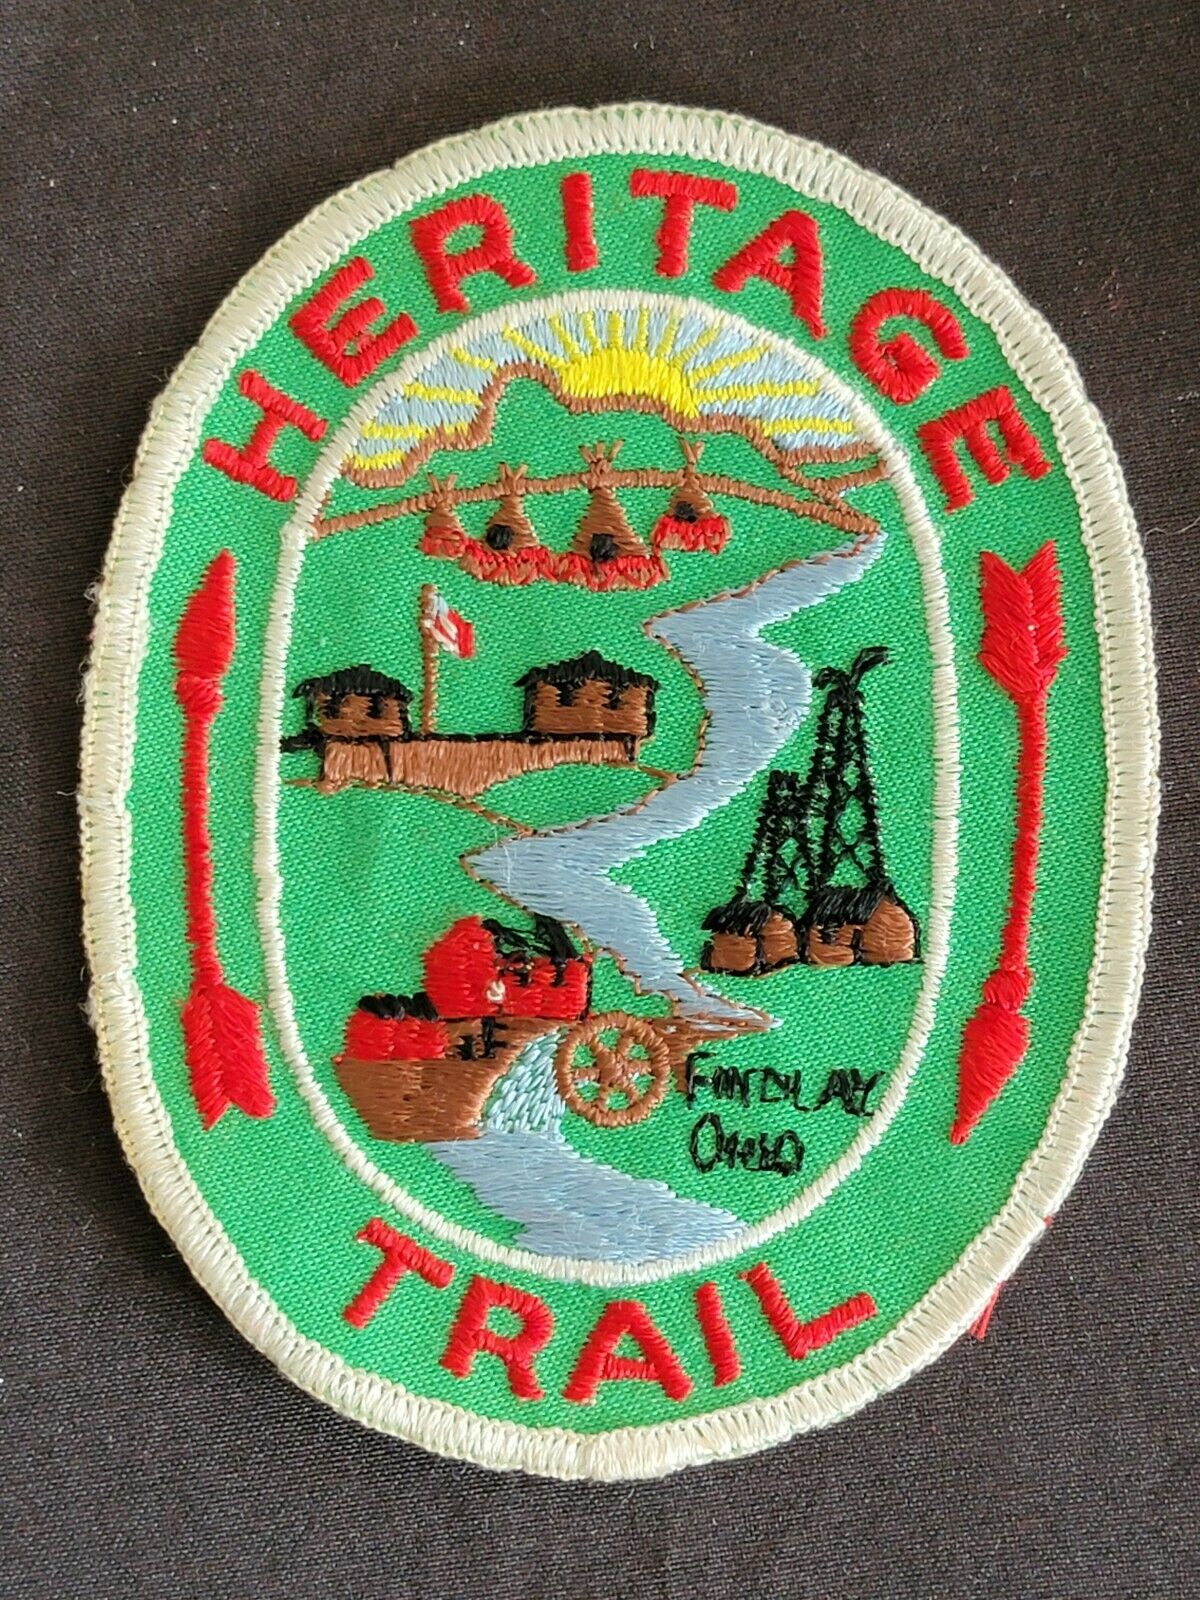 Heritage Trail Findlay Ohio Bsa Boy Scouts Patch